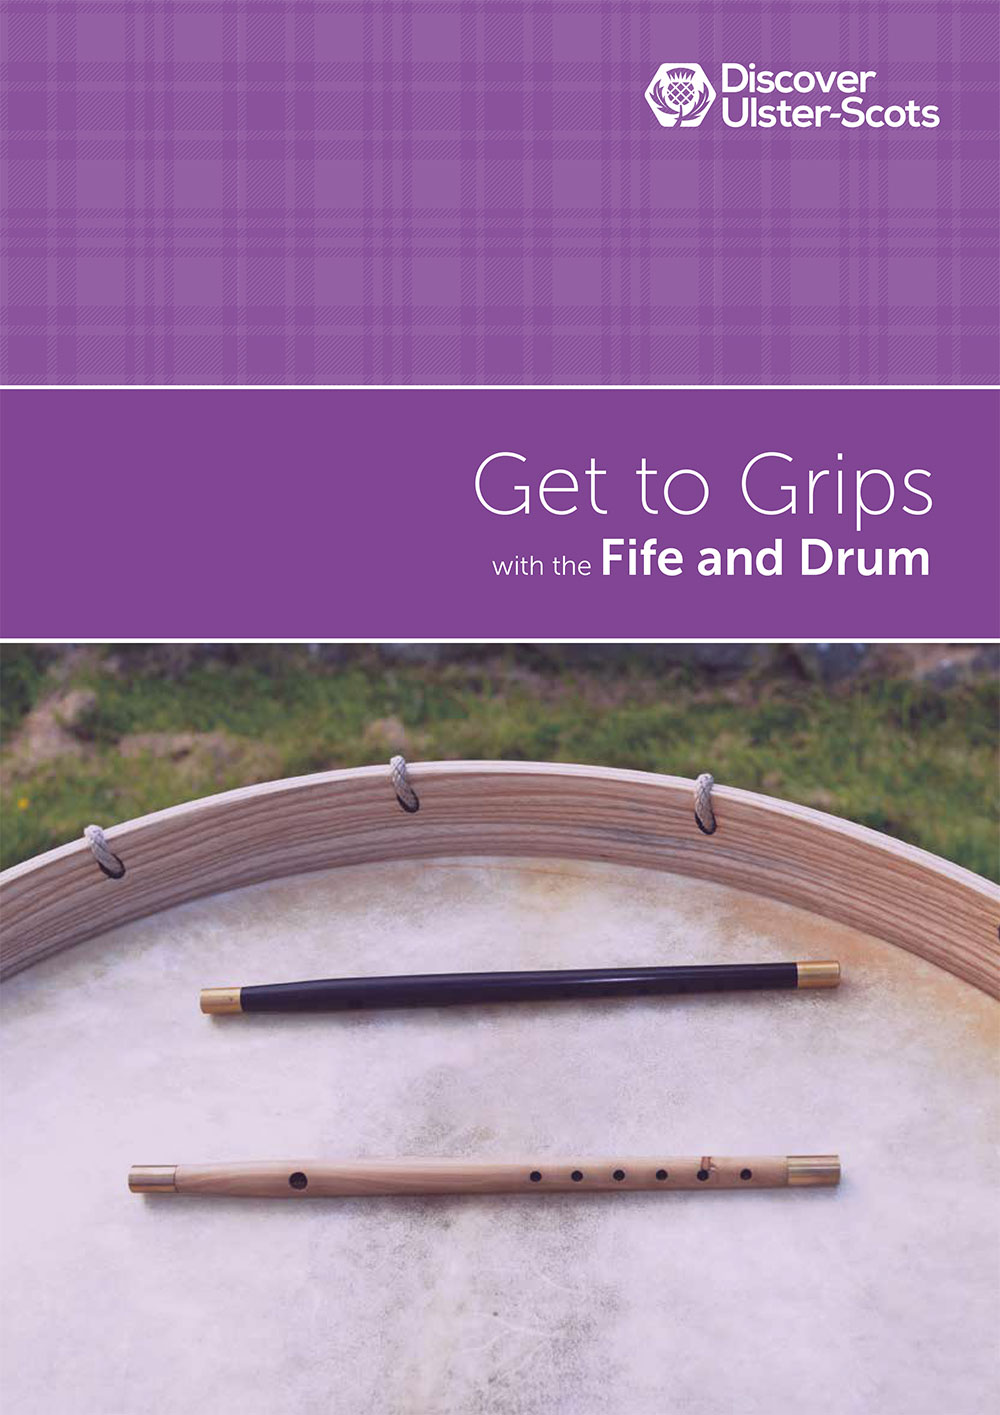 Get to Grips with the Fife and Drum